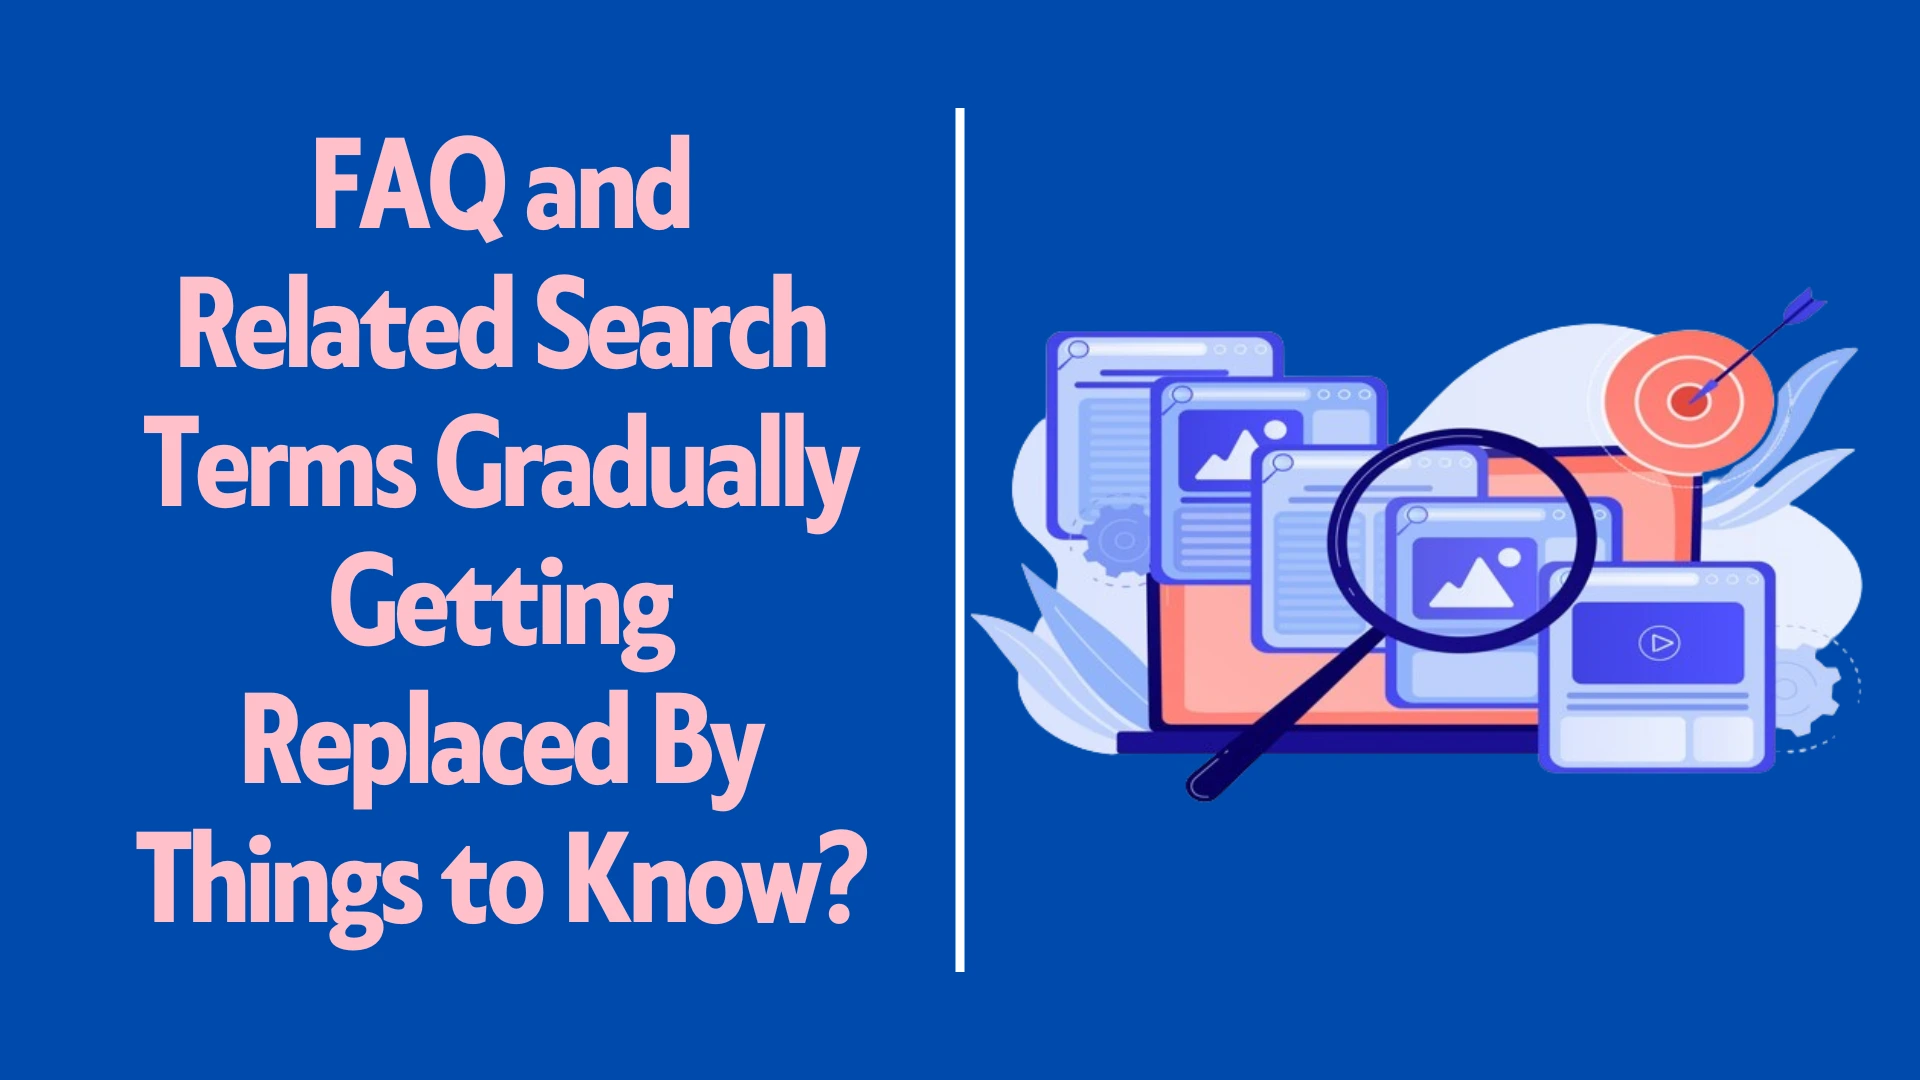 FAQ and Related Search Terms Gradually Getting Replaced By Things to Know